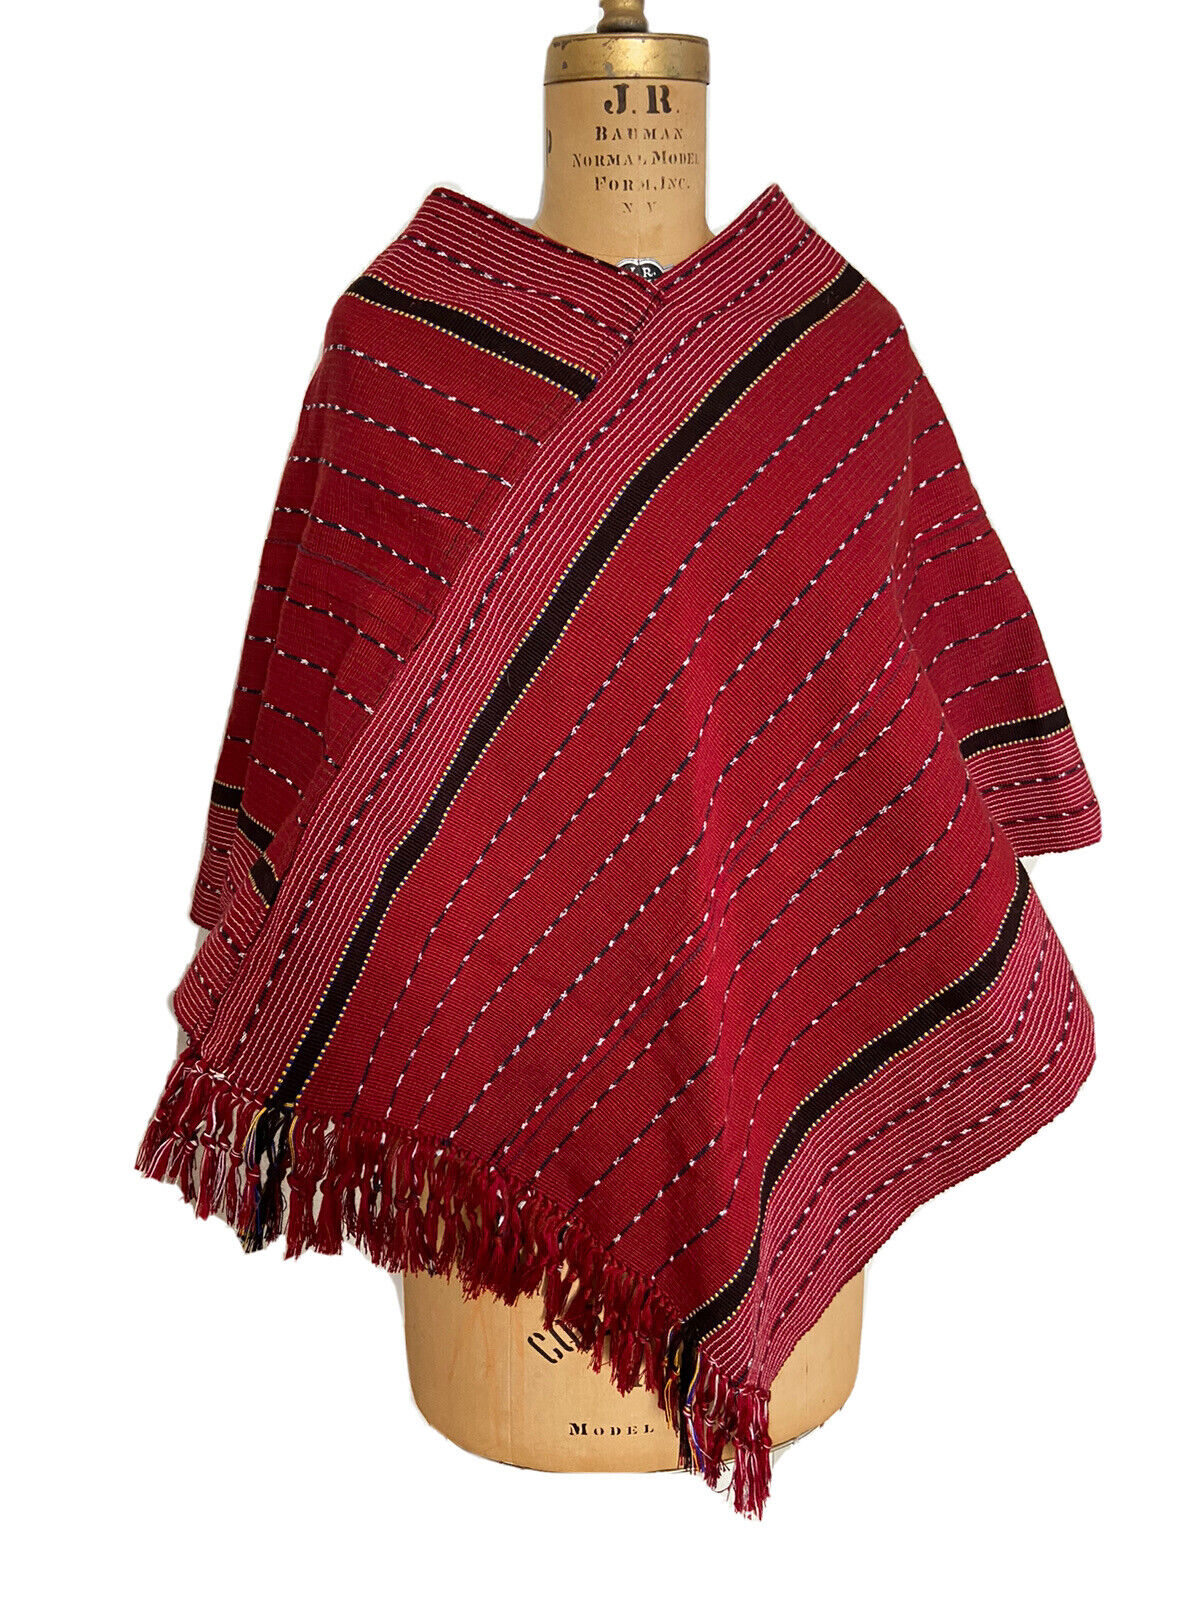 Andean Shaman's Red and Black Poncho- Andean Mountain Textile